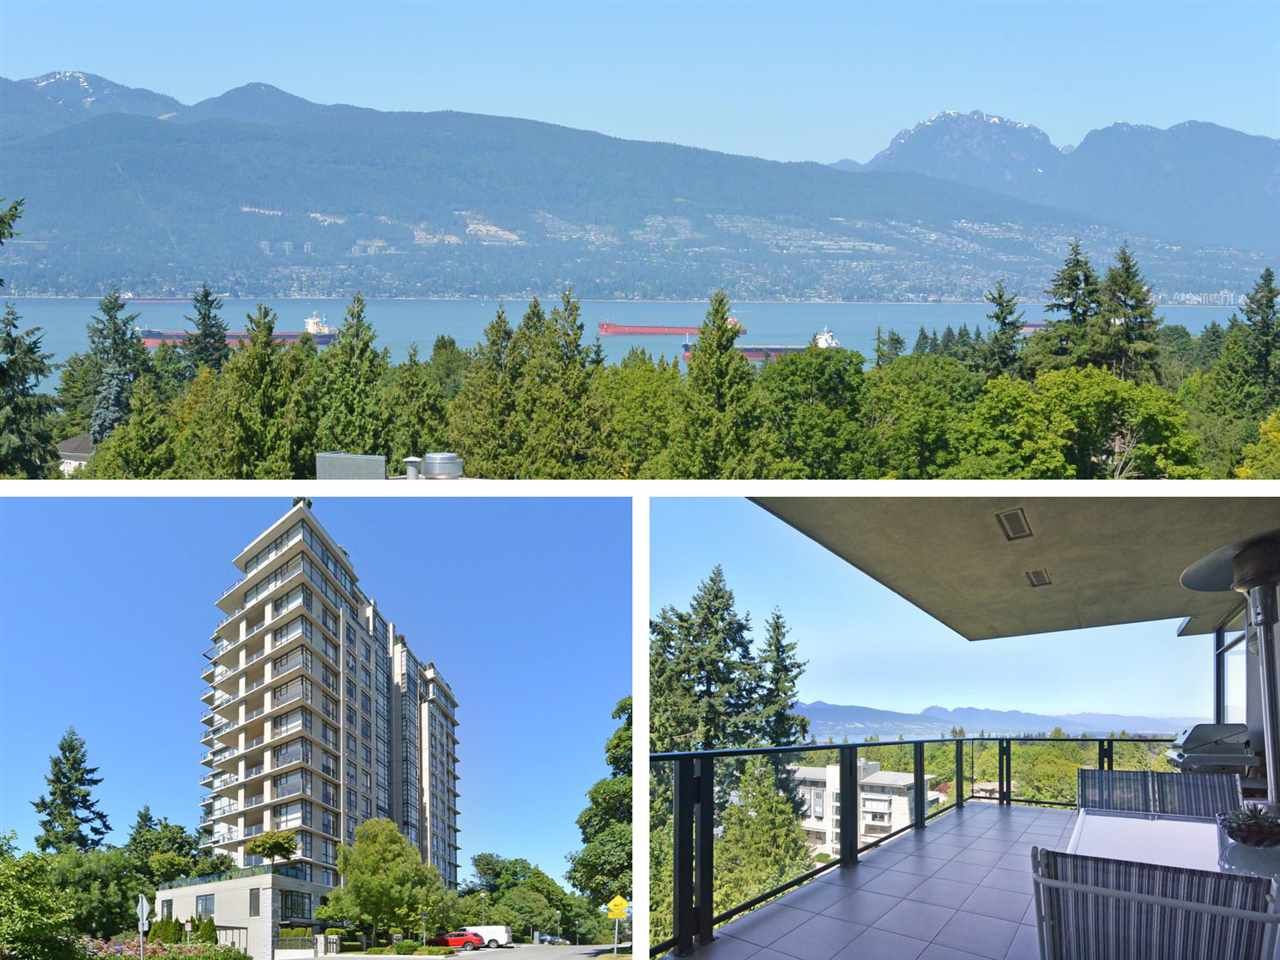 Main Photo: 901 5989 WALTER GAGE ROAD in Vancouver: University VW Condo for sale (Vancouver West)  : MLS®# R2206407